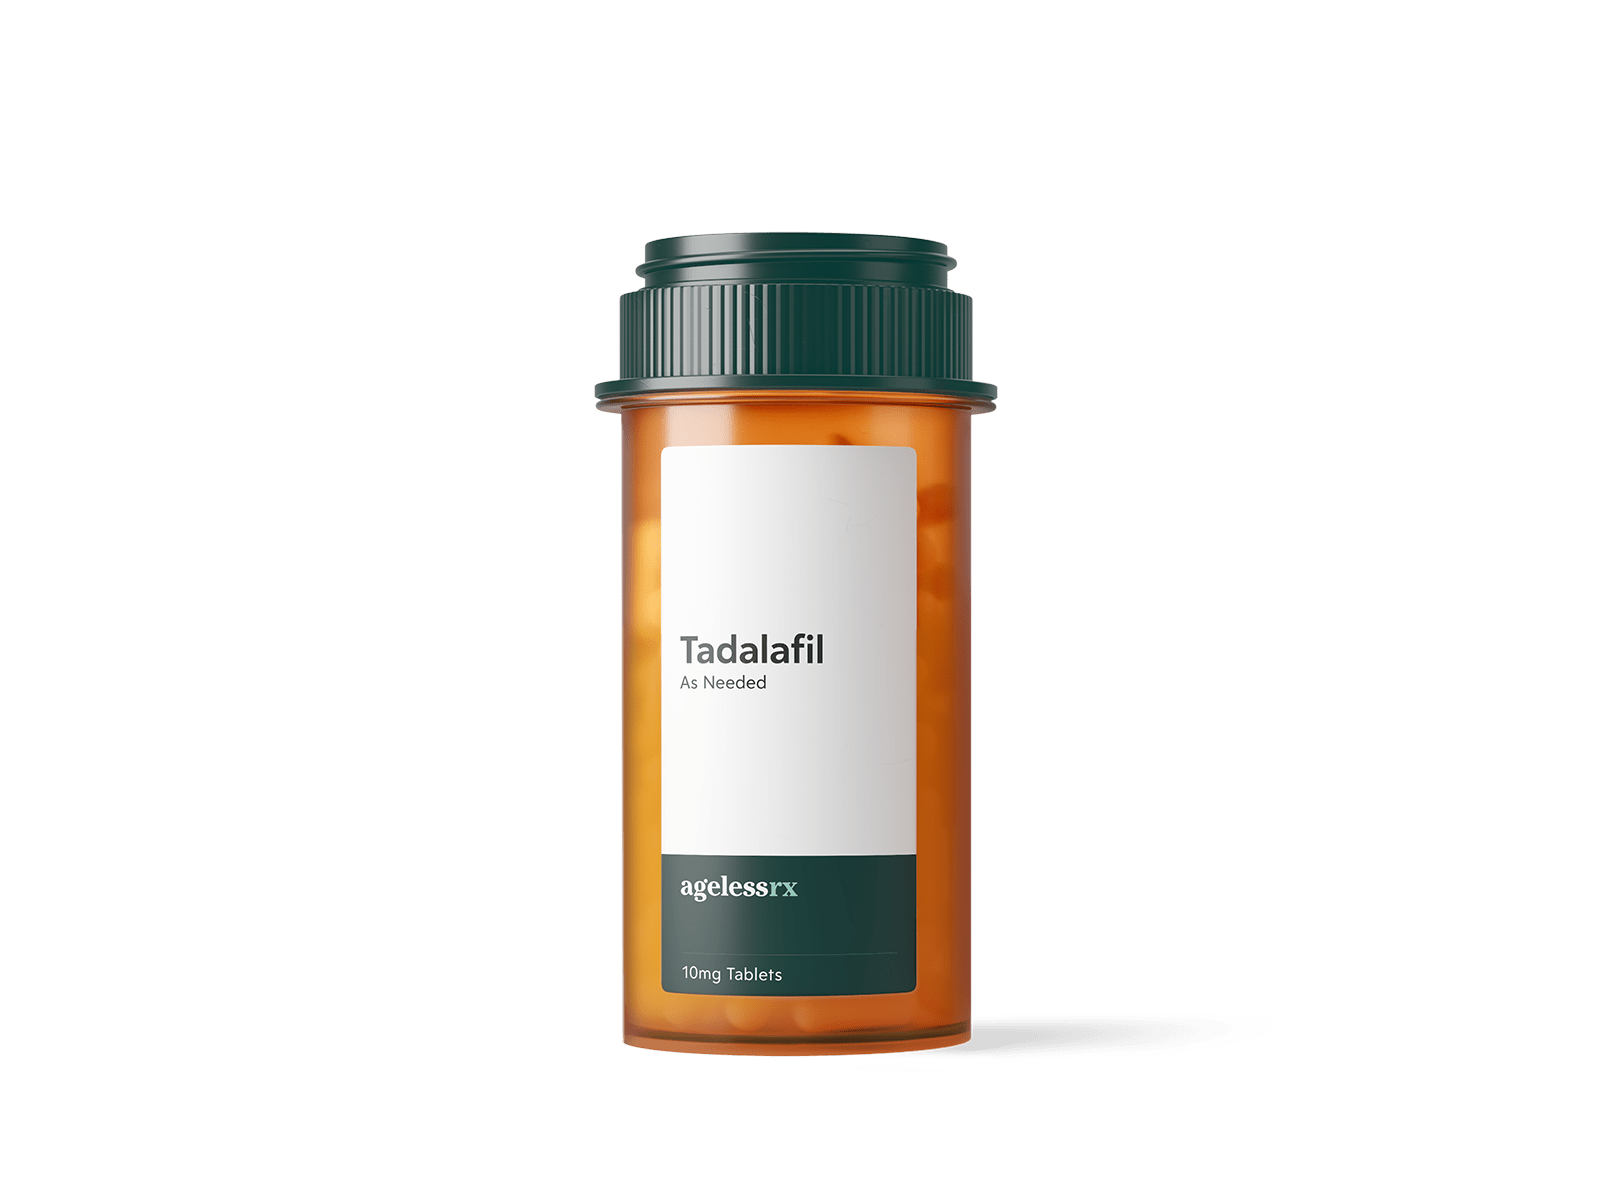 Product image for Tadalafil (As Needed)